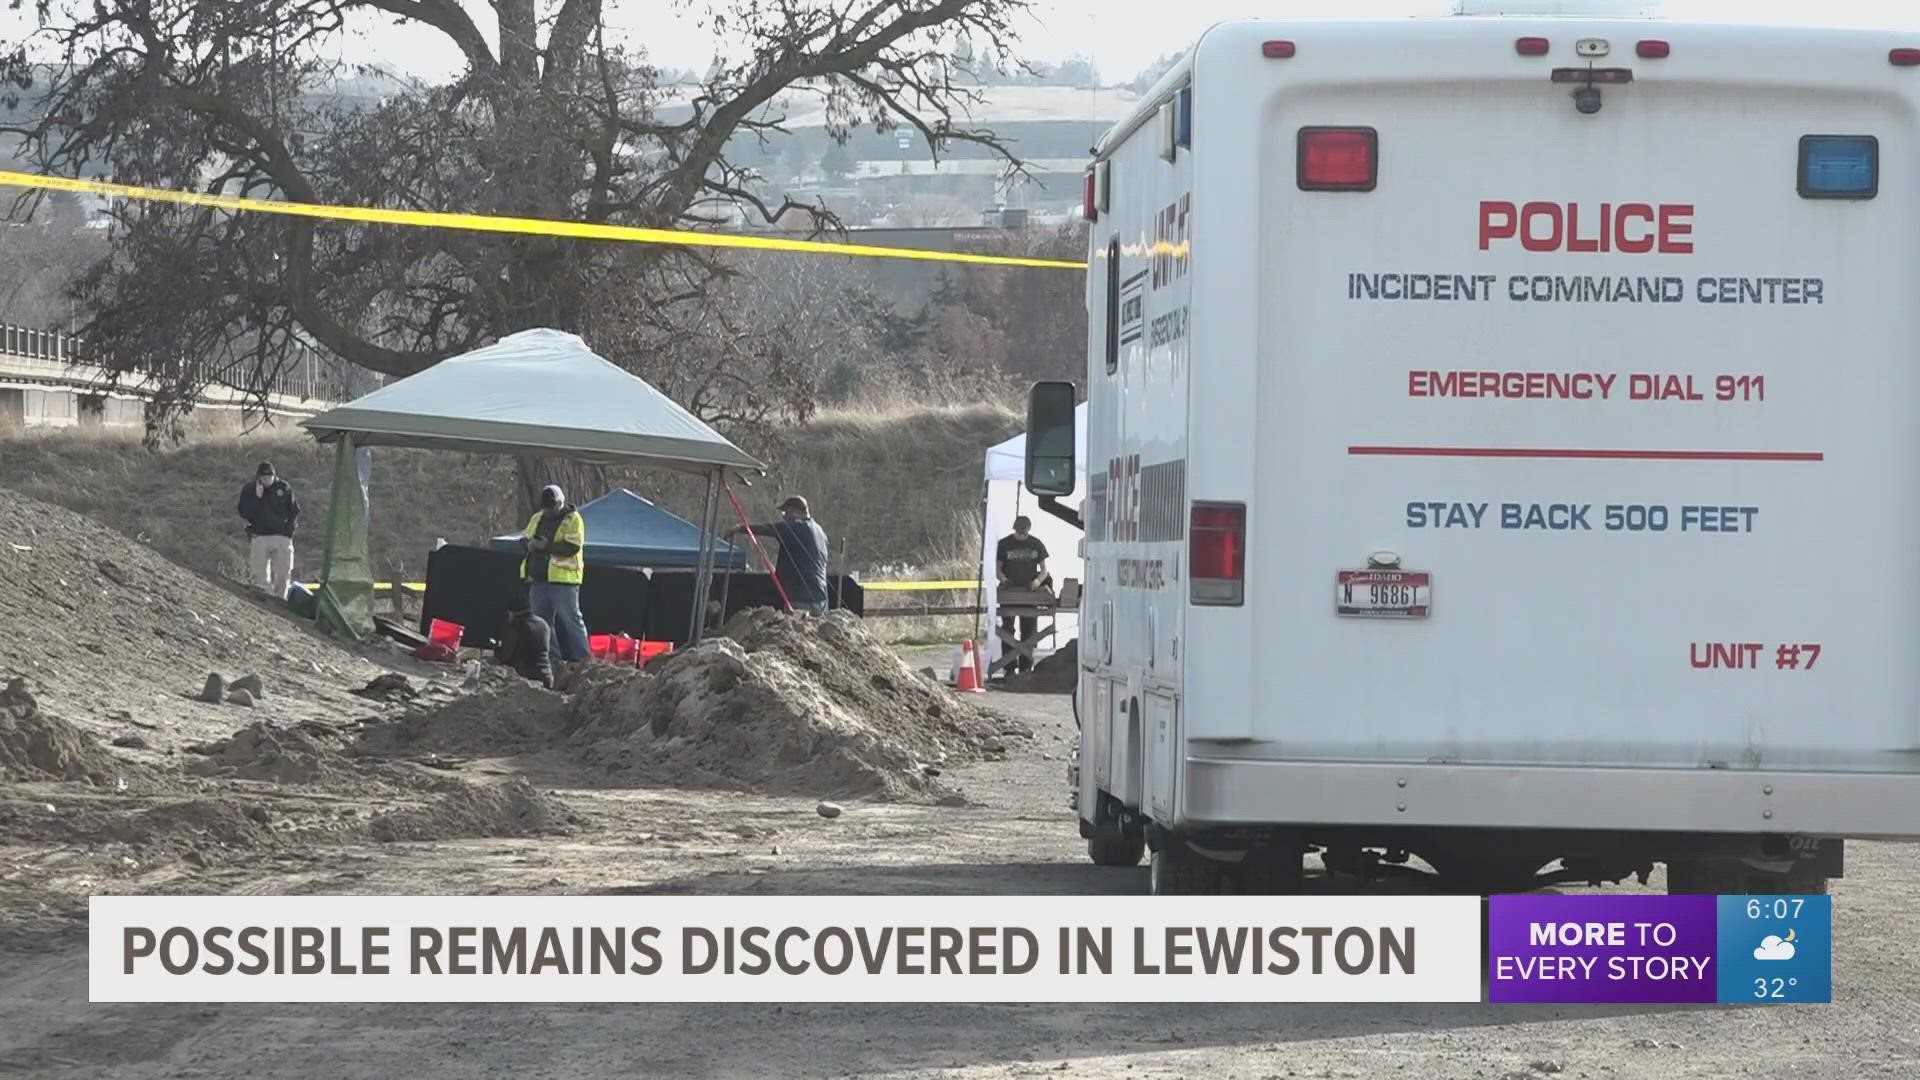 The Lewiston Police Department has confirmed that the remains found in North Lewiston are human.